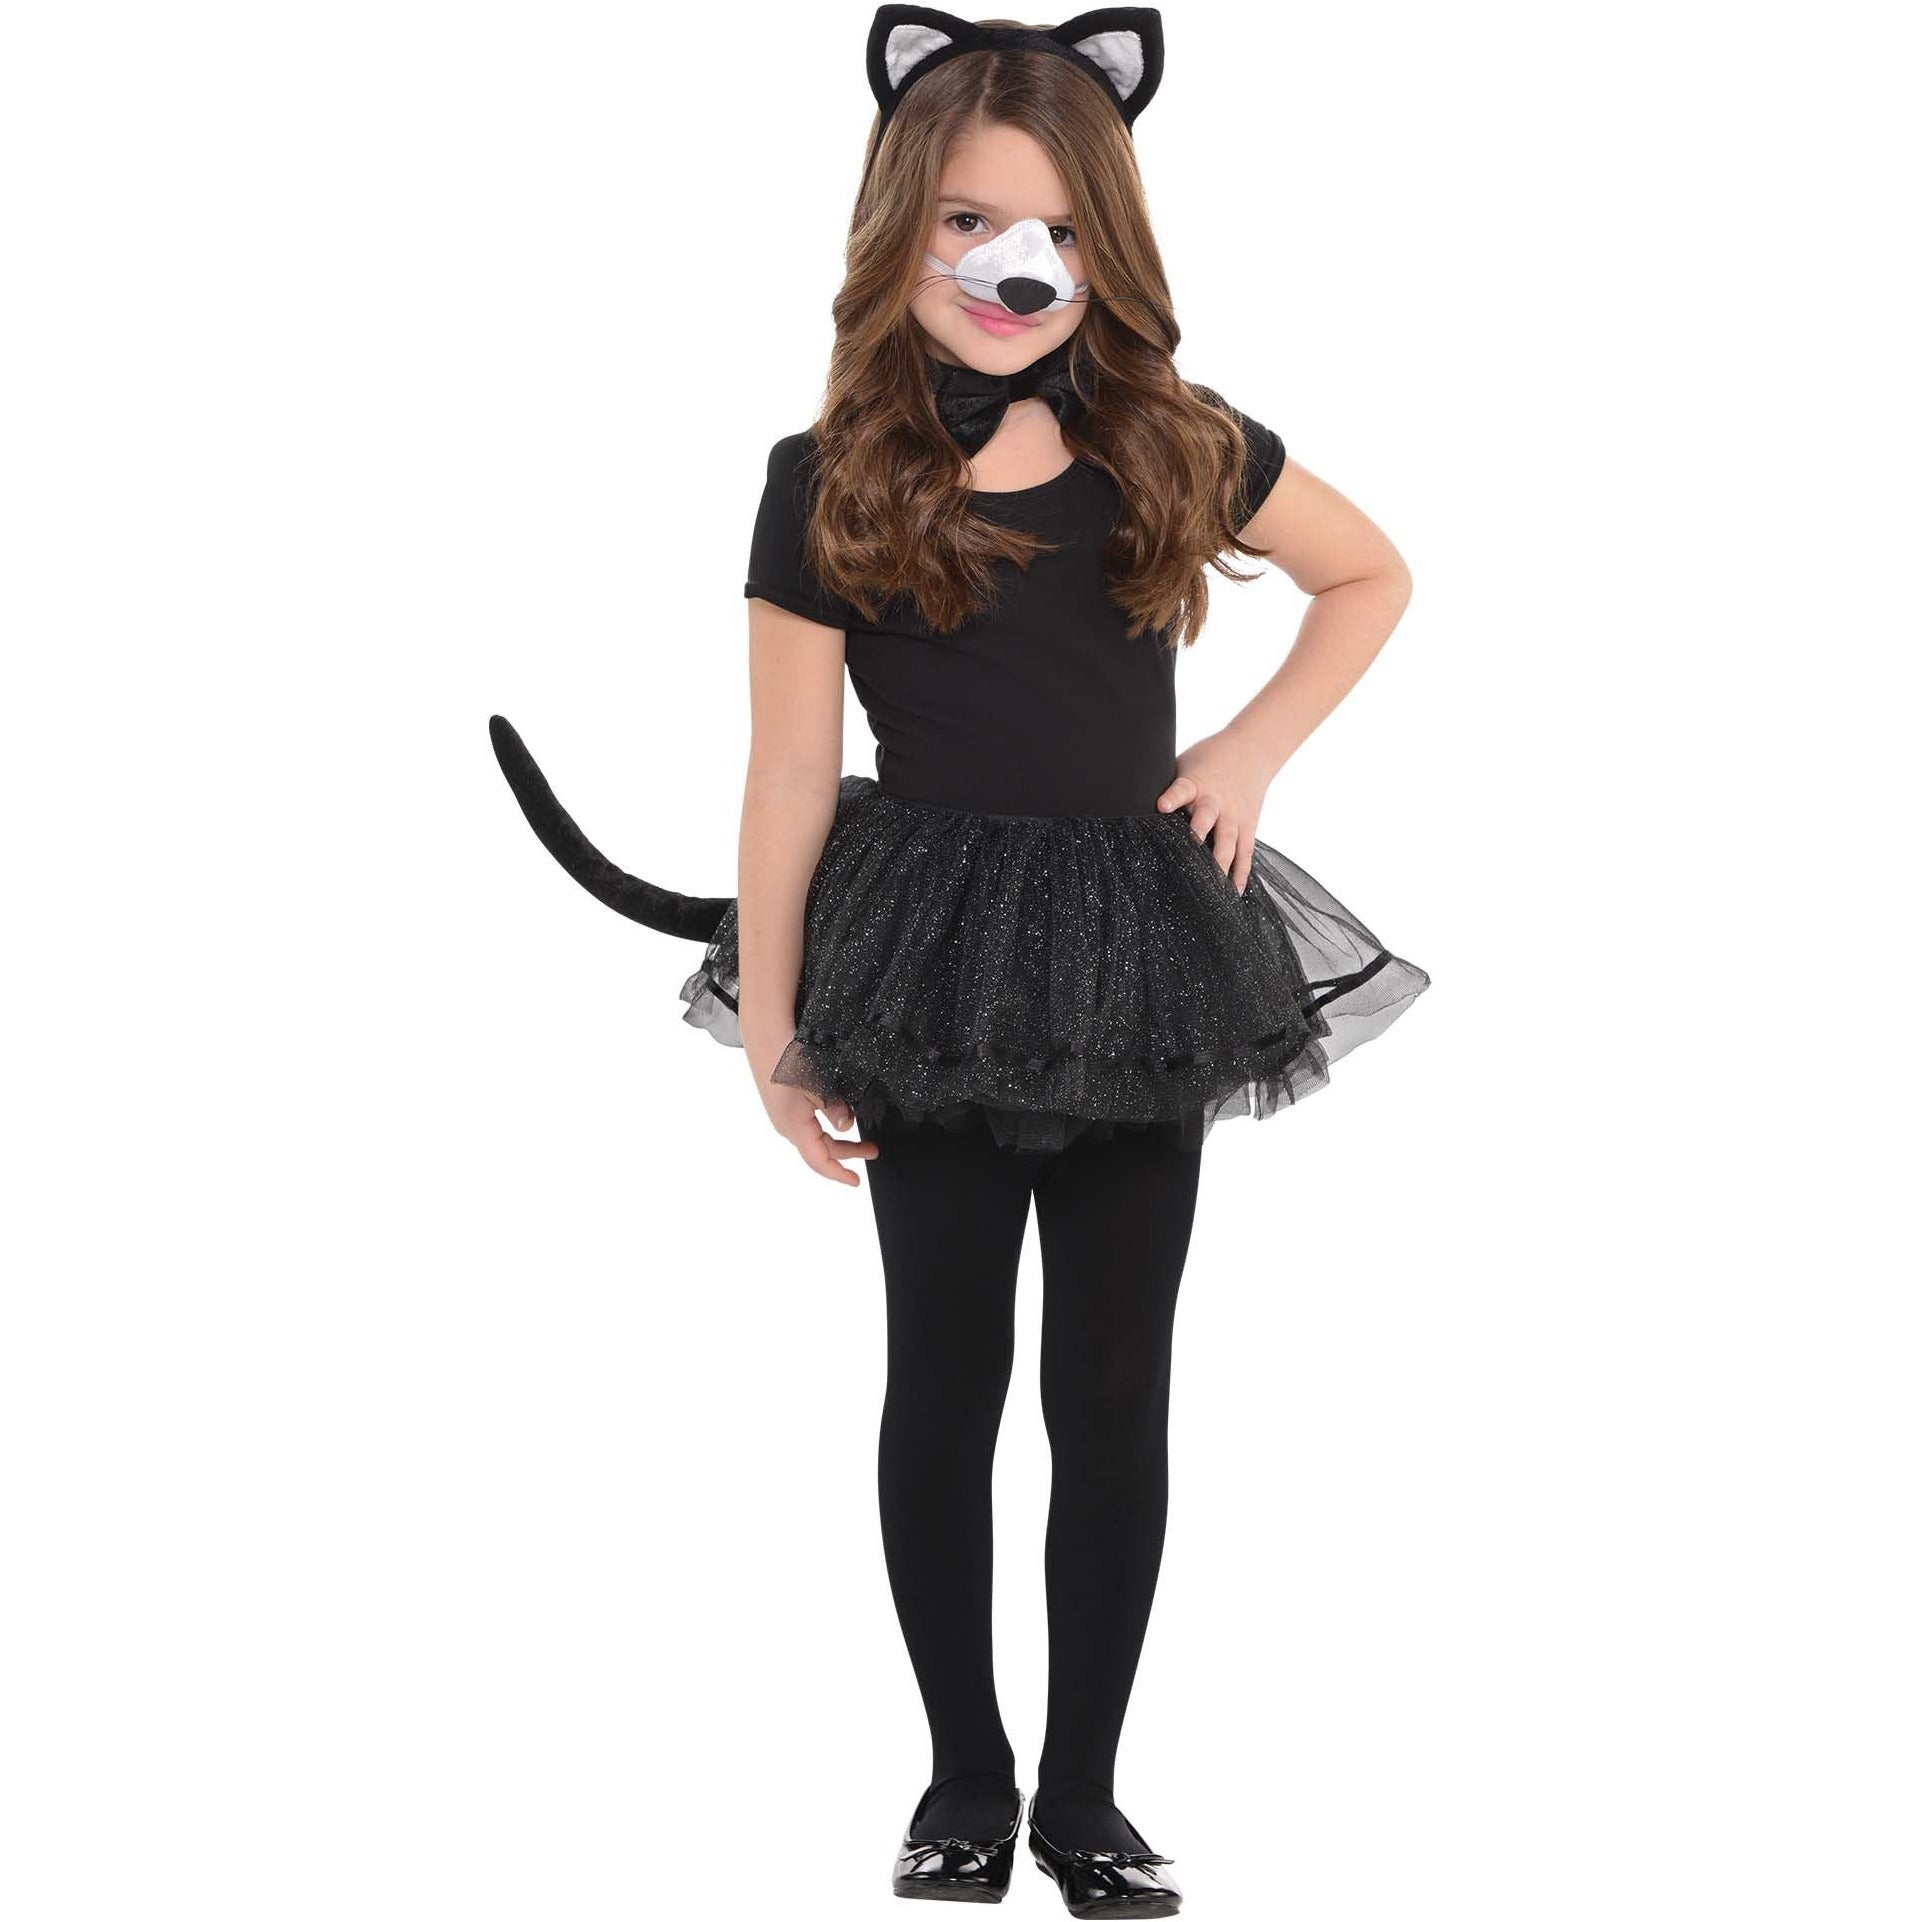 Amscan COSTUMES: ACCESSORIES Cat Sound Kit - Child